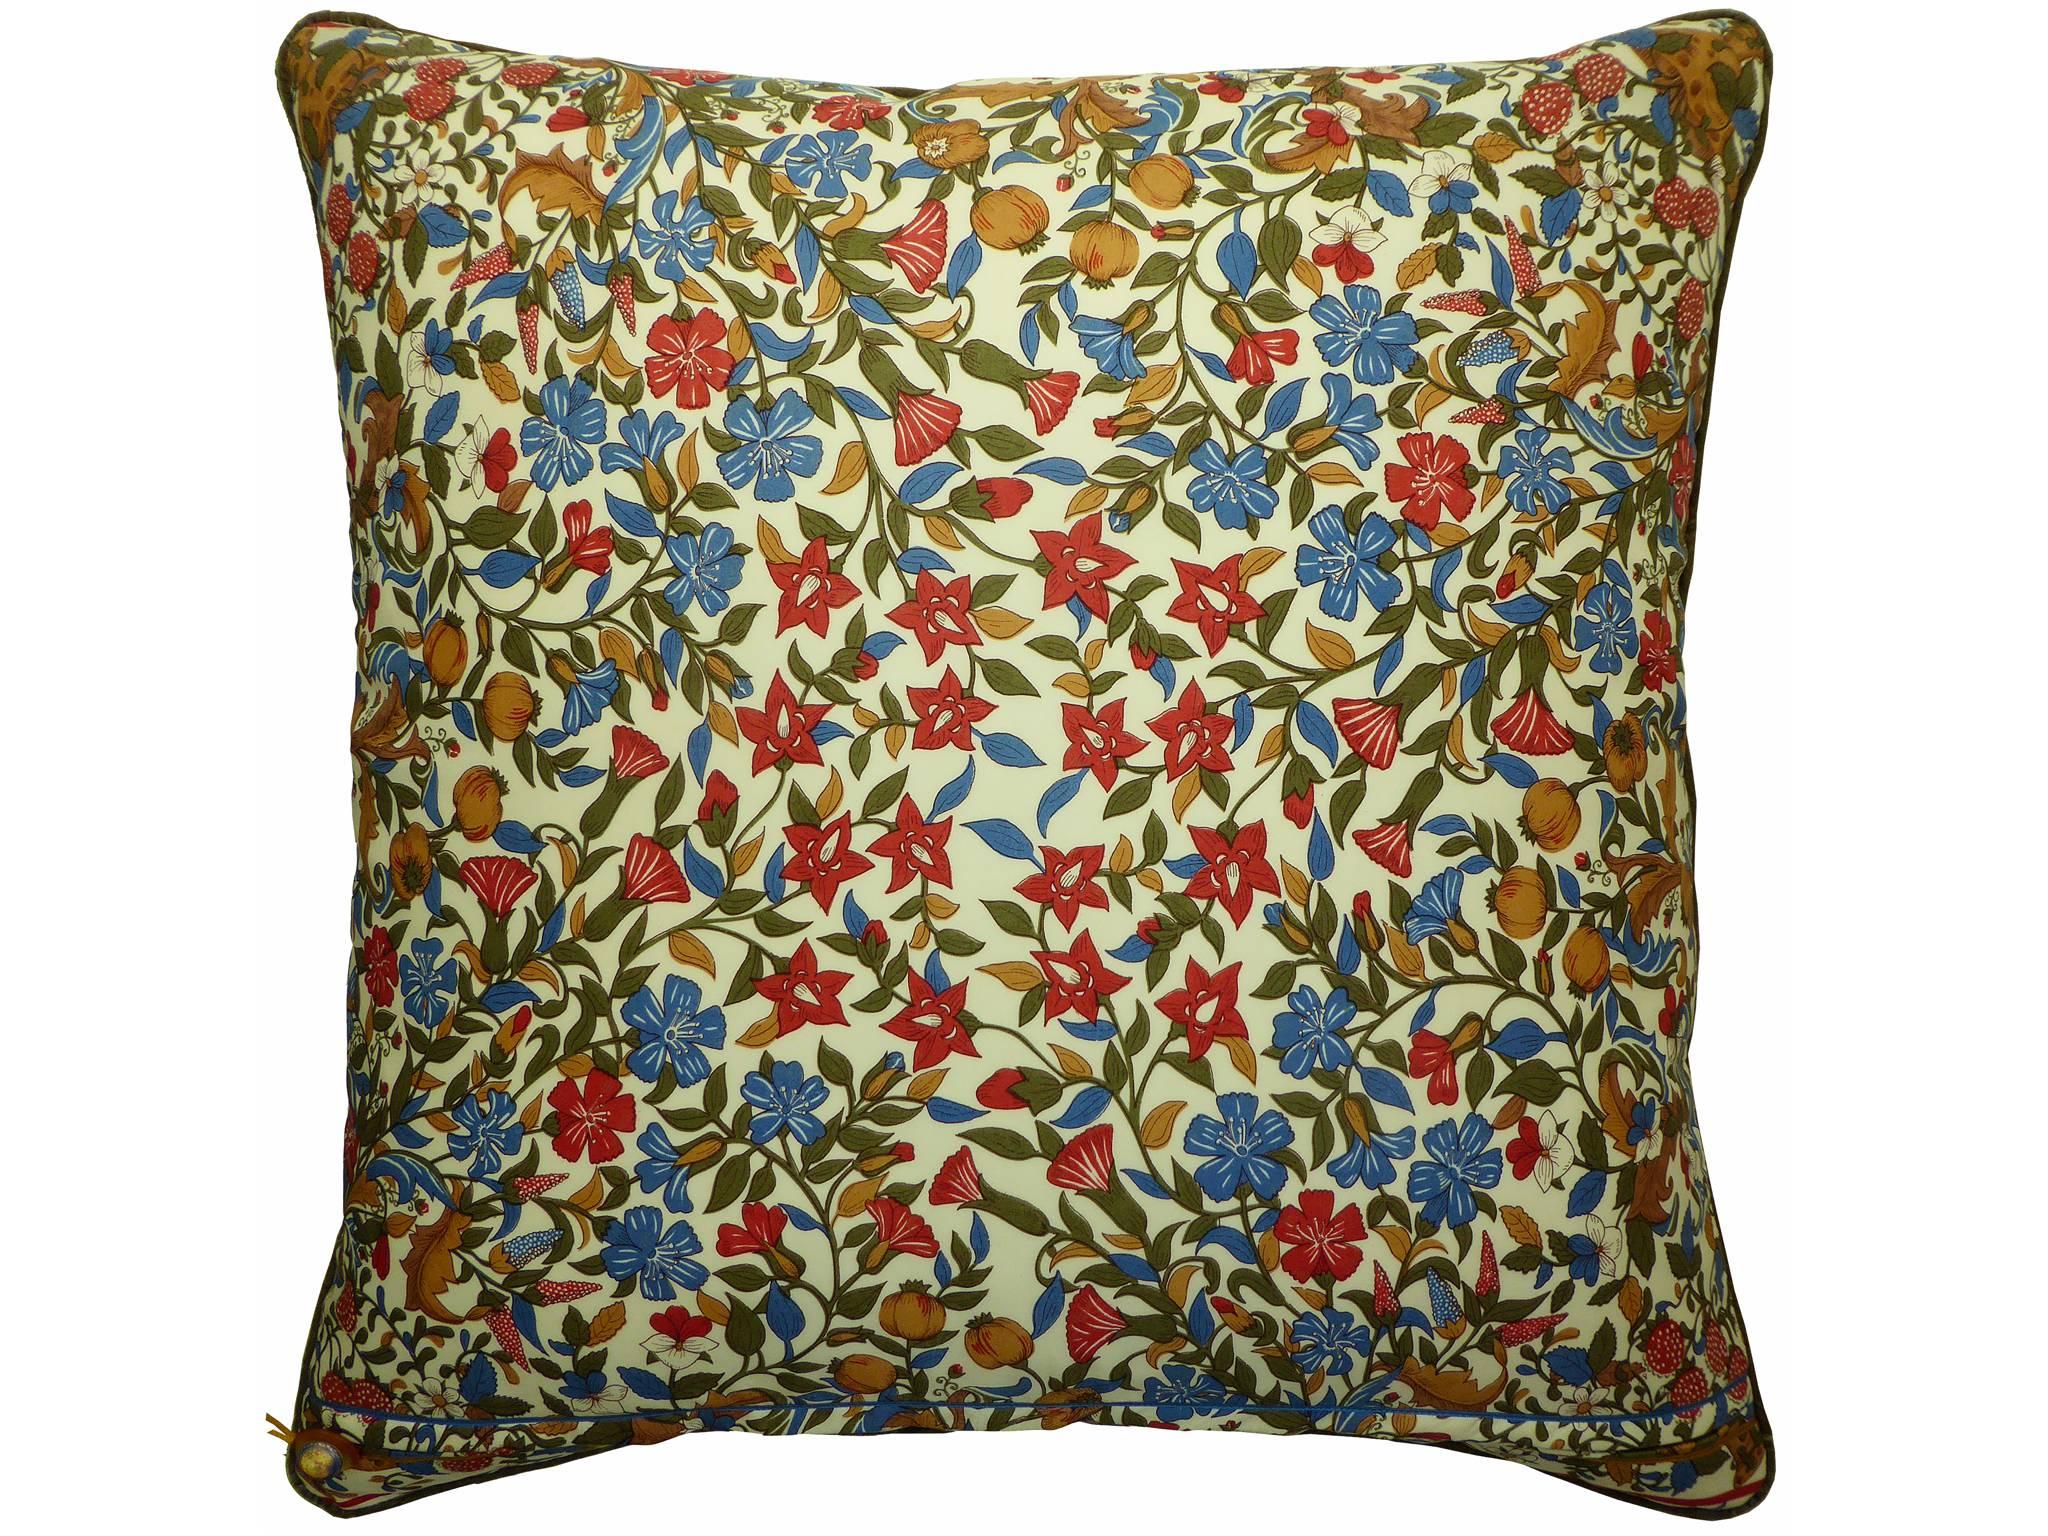 British bespoke-made luxury cushion created by using original vintage silks with two beautiful and complimentary mis-match sides; The front side is in rare silk and presents graphic drawings of popular motif’s from the Victorian era inspired by